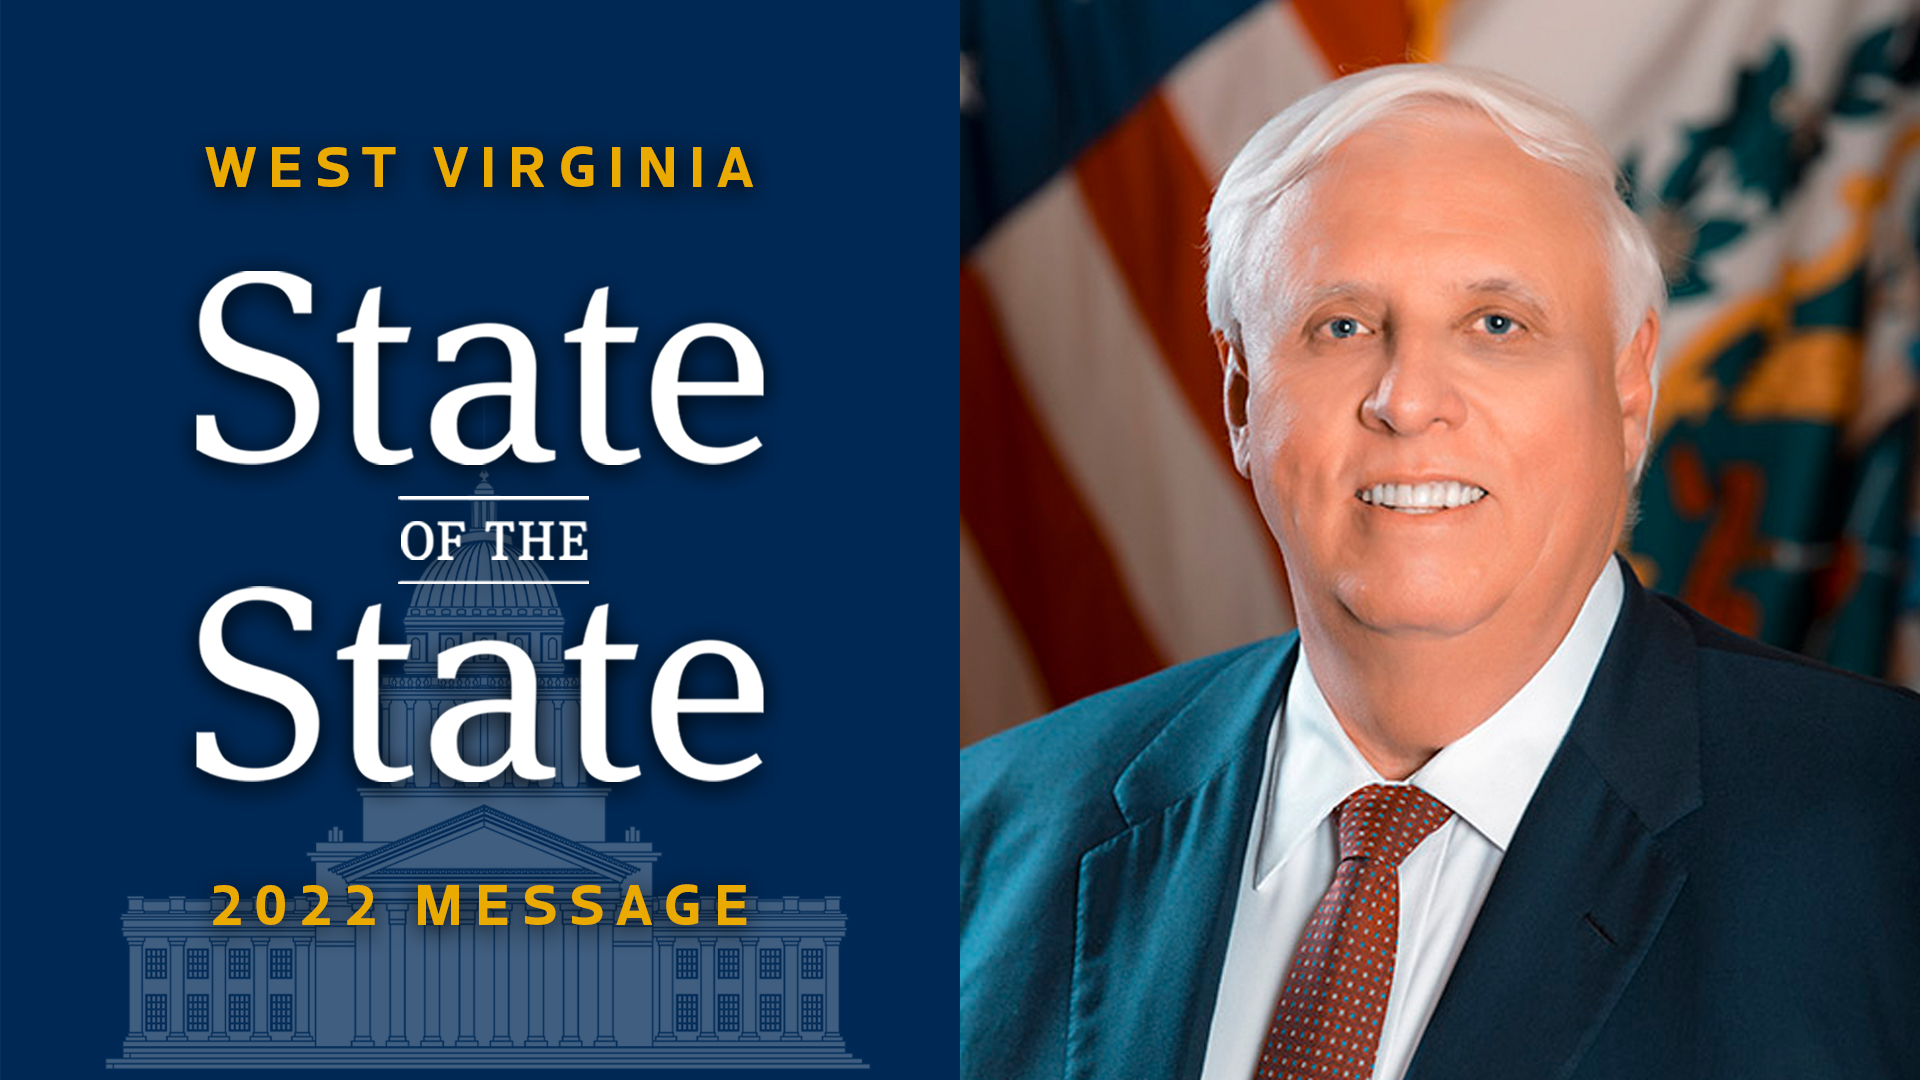 Gov Justice Delivers 2022 State Of The State Message To Legislature